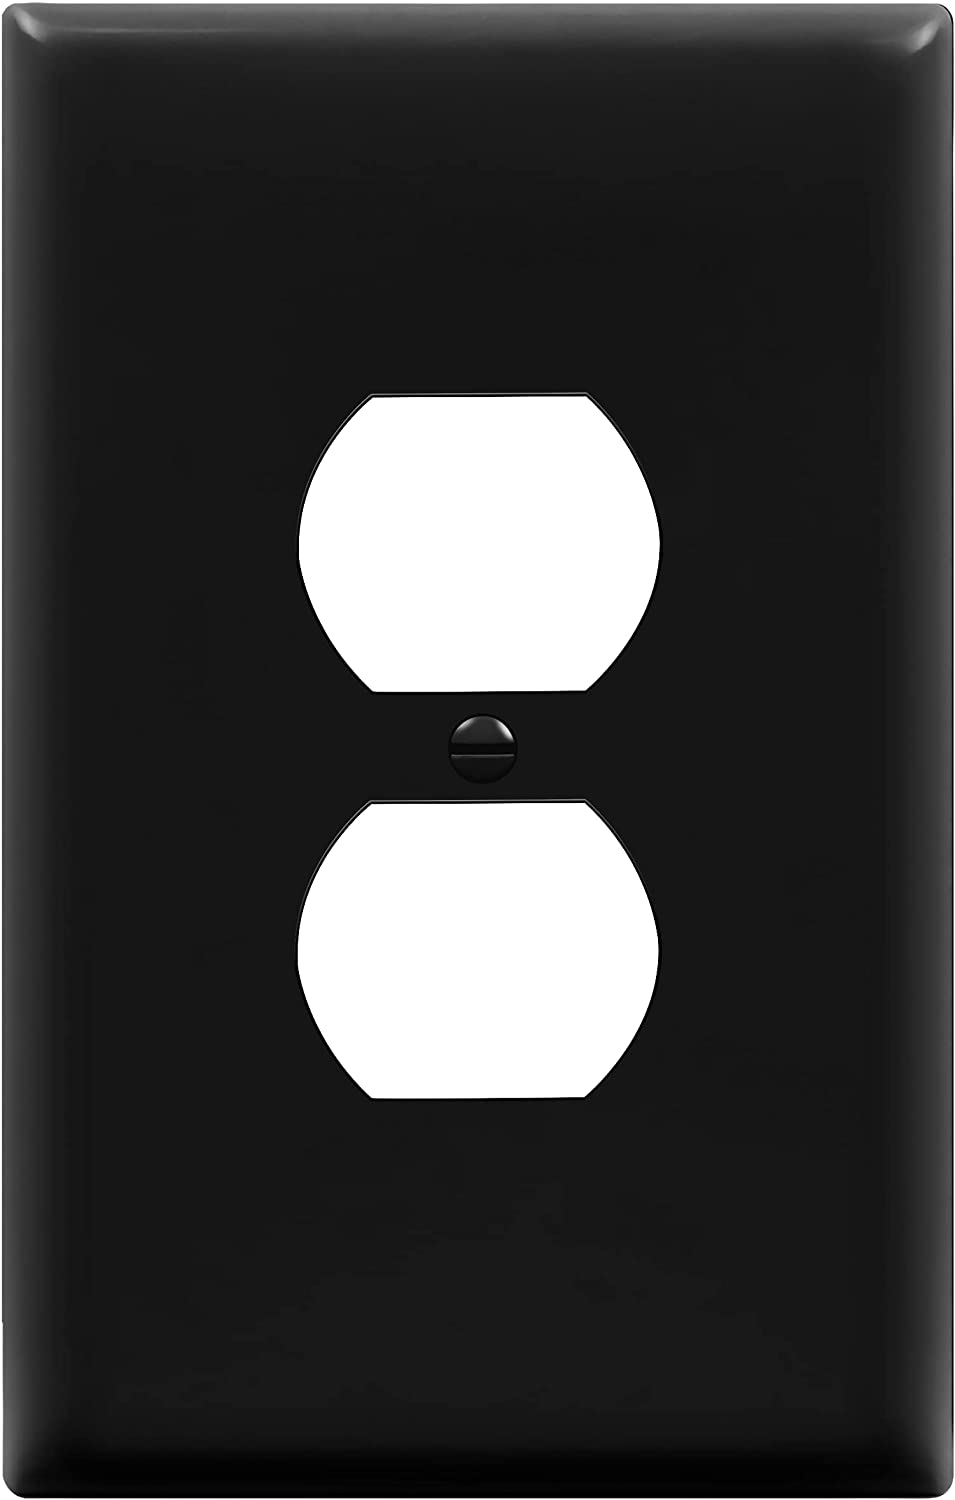 ENERLITES Duplex Receptacle Wall Plate, Jumbo Electrical Outlet Cover, Gloss Finish, Oversized 1-Gang, Polycarbonate Thermoplastic, Black - image 1 of 5